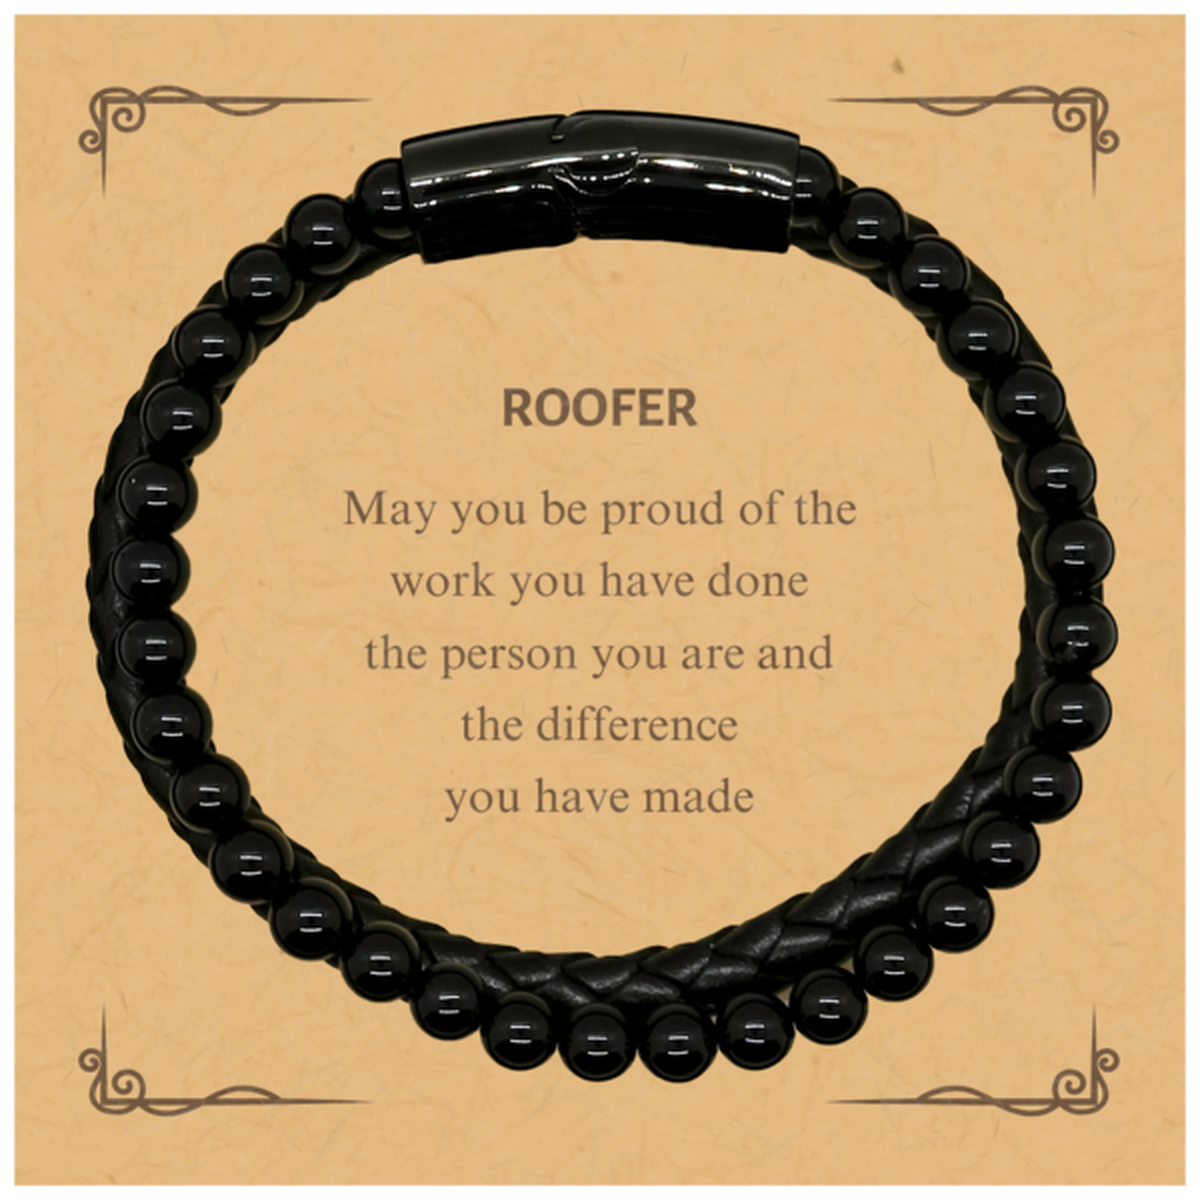 Roofer May you be proud of the work you have done, Retirement Roofer Stone Leather Bracelets for Colleague Appreciation Gifts Amazing for Roofer